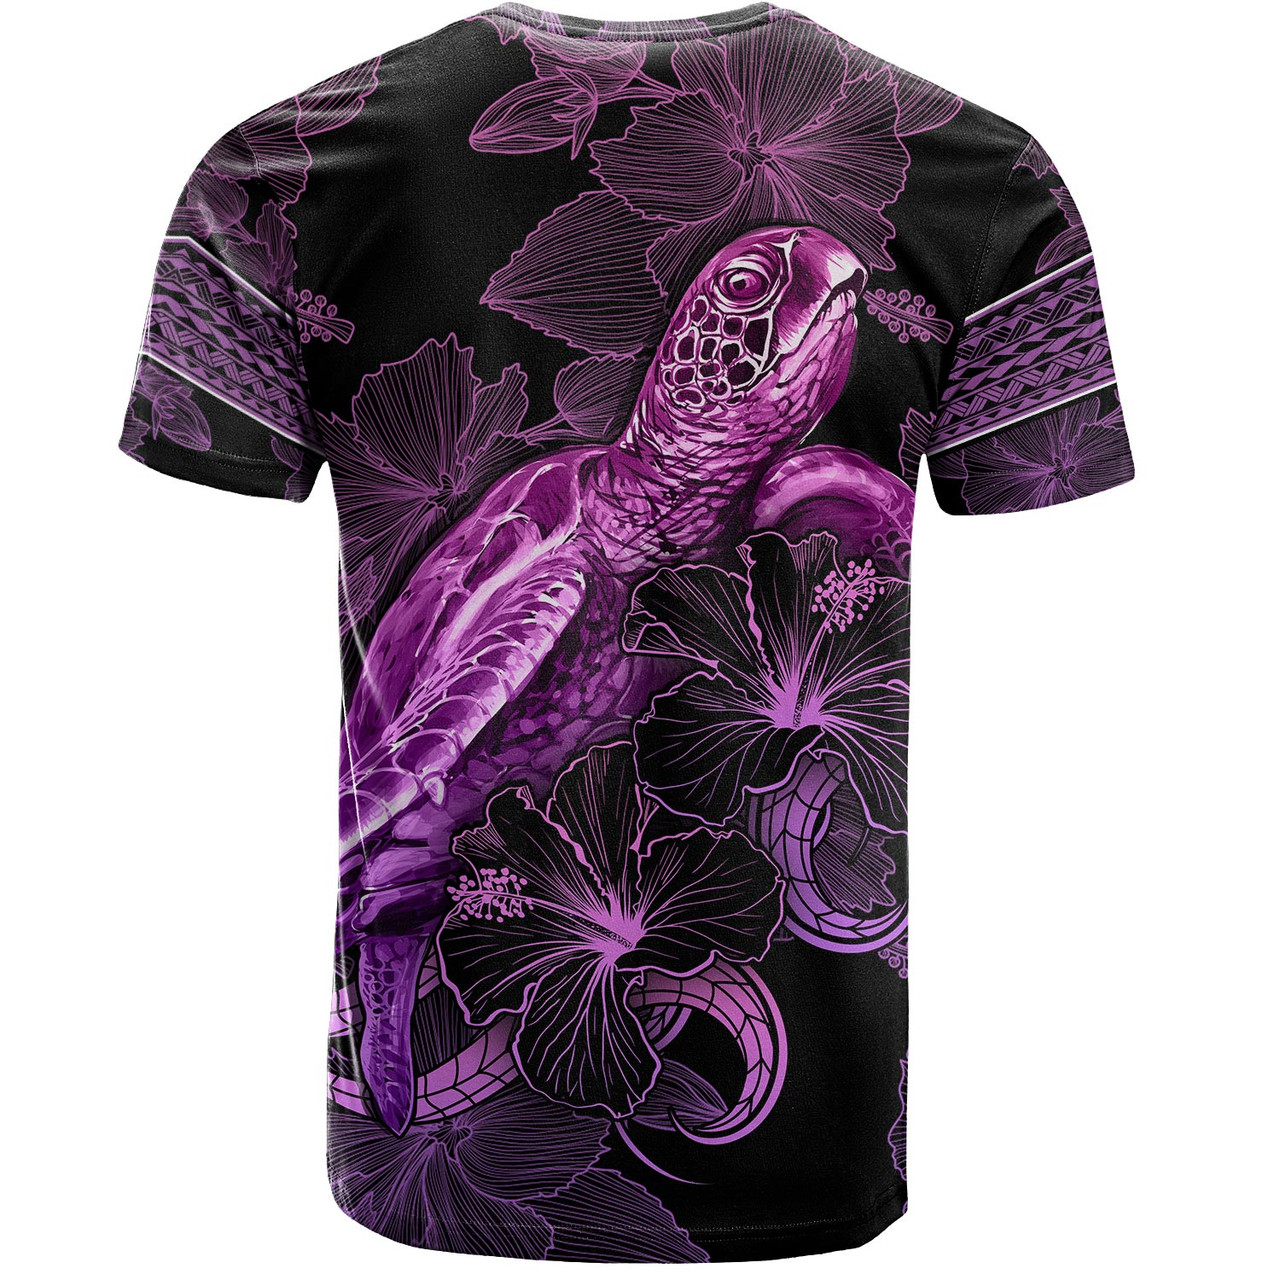 Austral Islands T-Shirt Sea Turtle With Blooming Hibiscus Flowers Tribal Purple